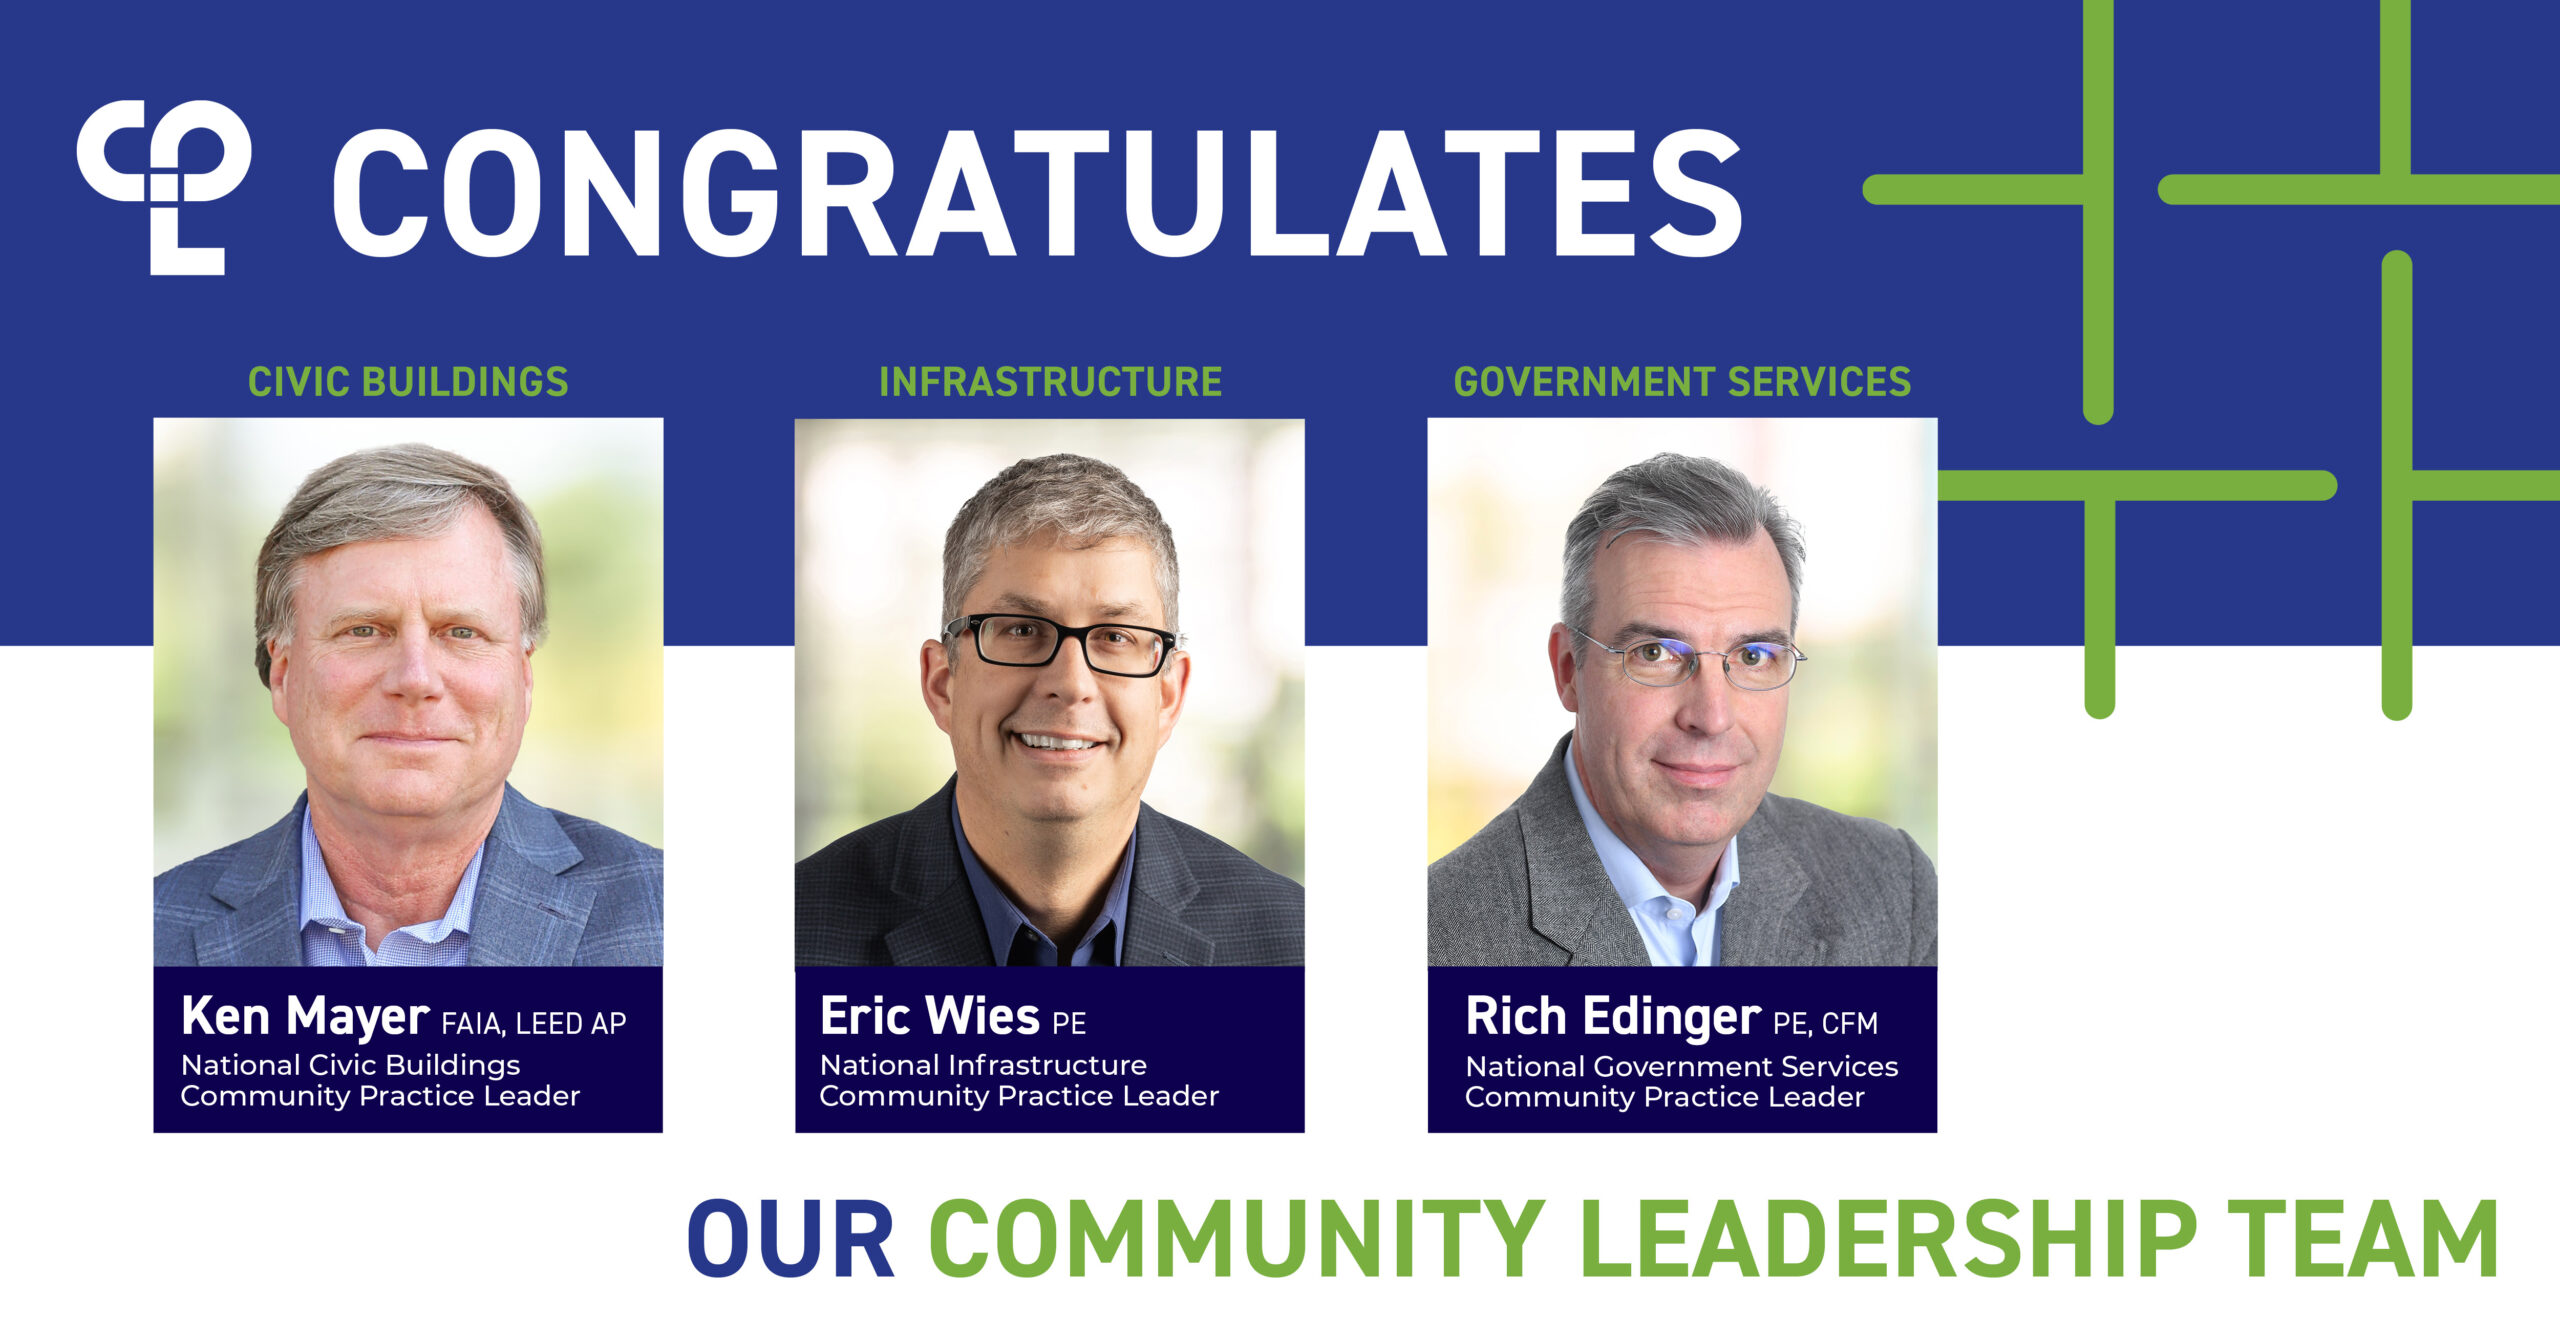 Graphic showing the headshots of three men. Text above reads "CPL Congratulates" then below "Our Community Leadership Team." Then Civic Buildings and below the headshot it reads "Ken Mayer FAIA, LEED AP - National Civic Buildings Community Practice Leader." Above the next headshot it reads "Infrastructure" and then below reads "Eric Wies PE - National Infrastructure Community Practice Leader." Above the final headshot reads "Government Services" below the headshot it says "Rich Edinger PE, CFM - National Government Services Community Practice Leader"